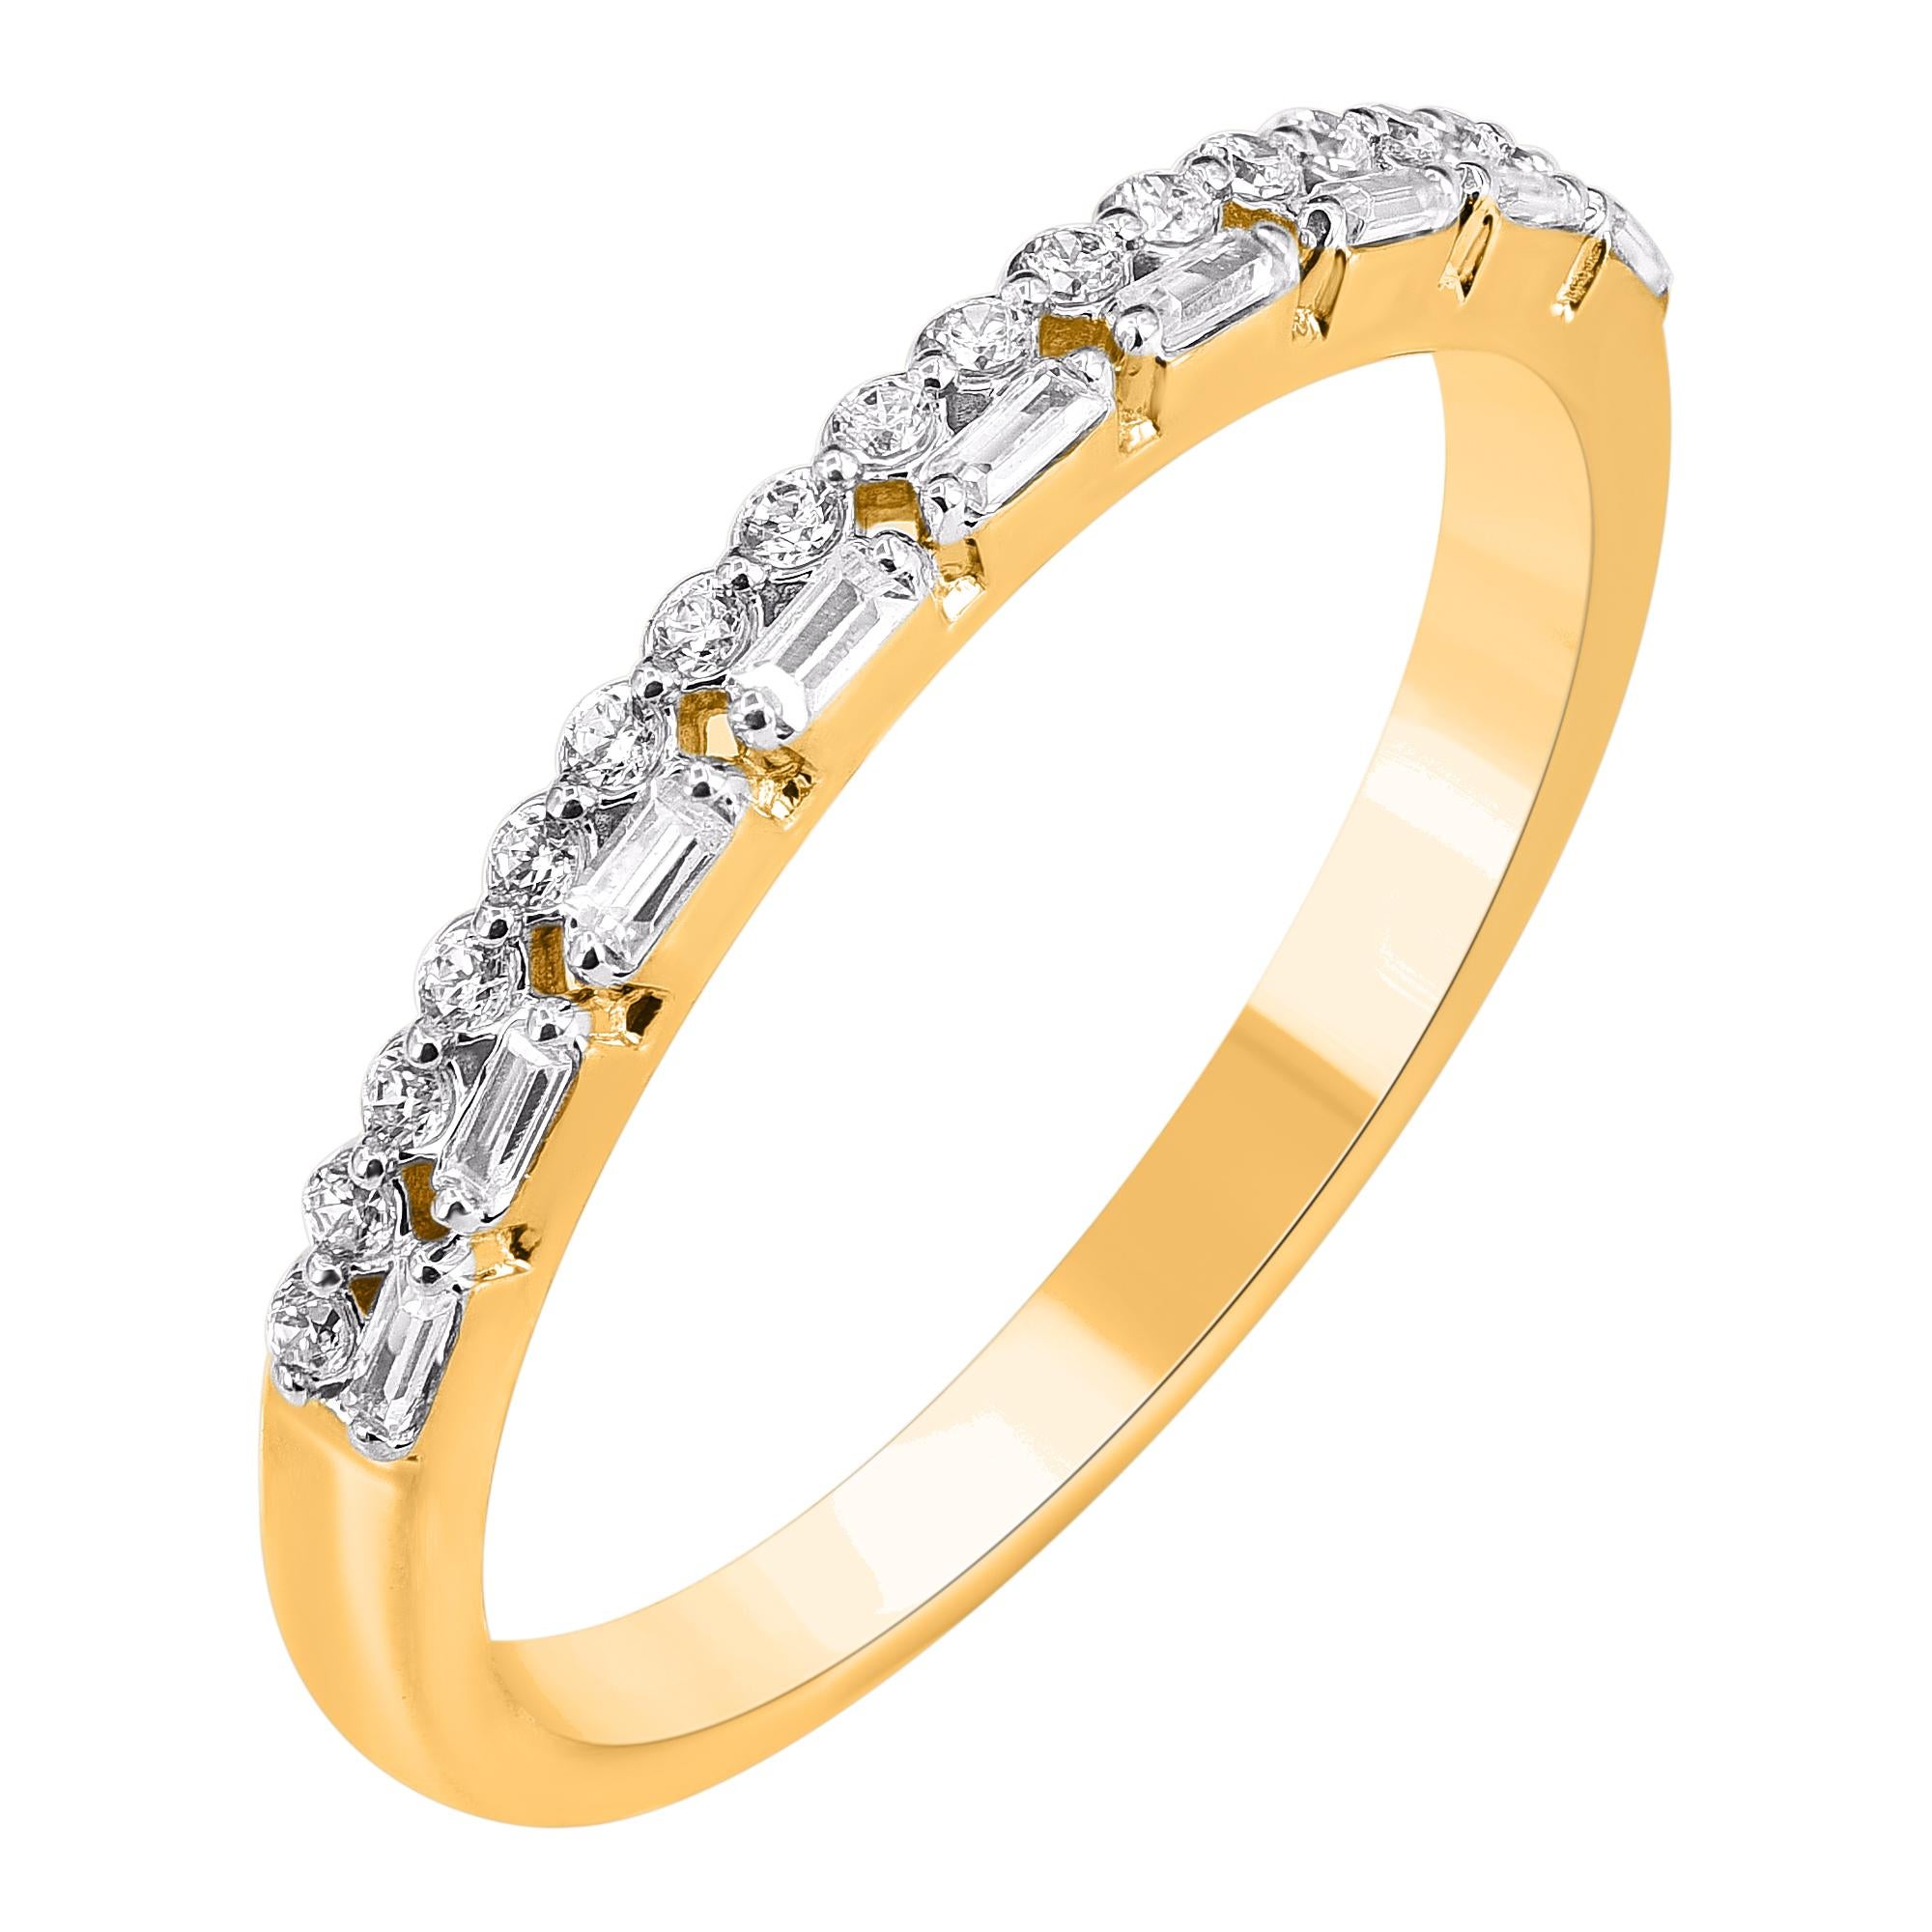 Art Deco TJD 0.20 Carat Round & Baguette Cut Diamond 14KT Yellow Gold Wedding Band Ring For Sale